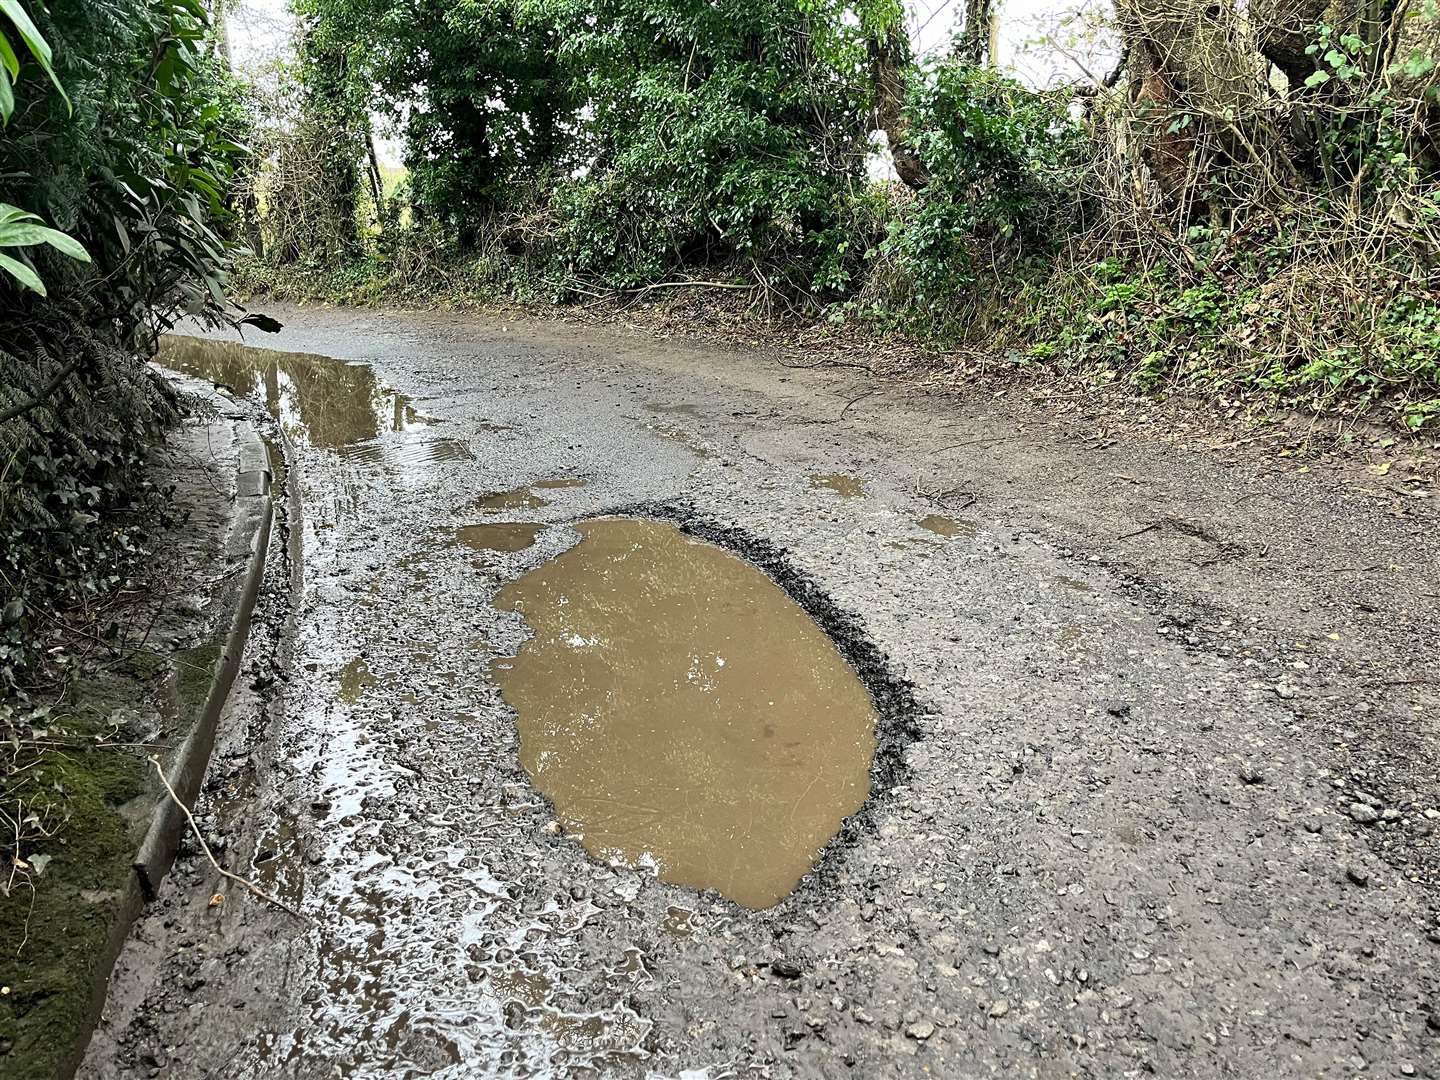 Residents in West Hougham, Dover, recently said they were living in the pothole capital of Kent